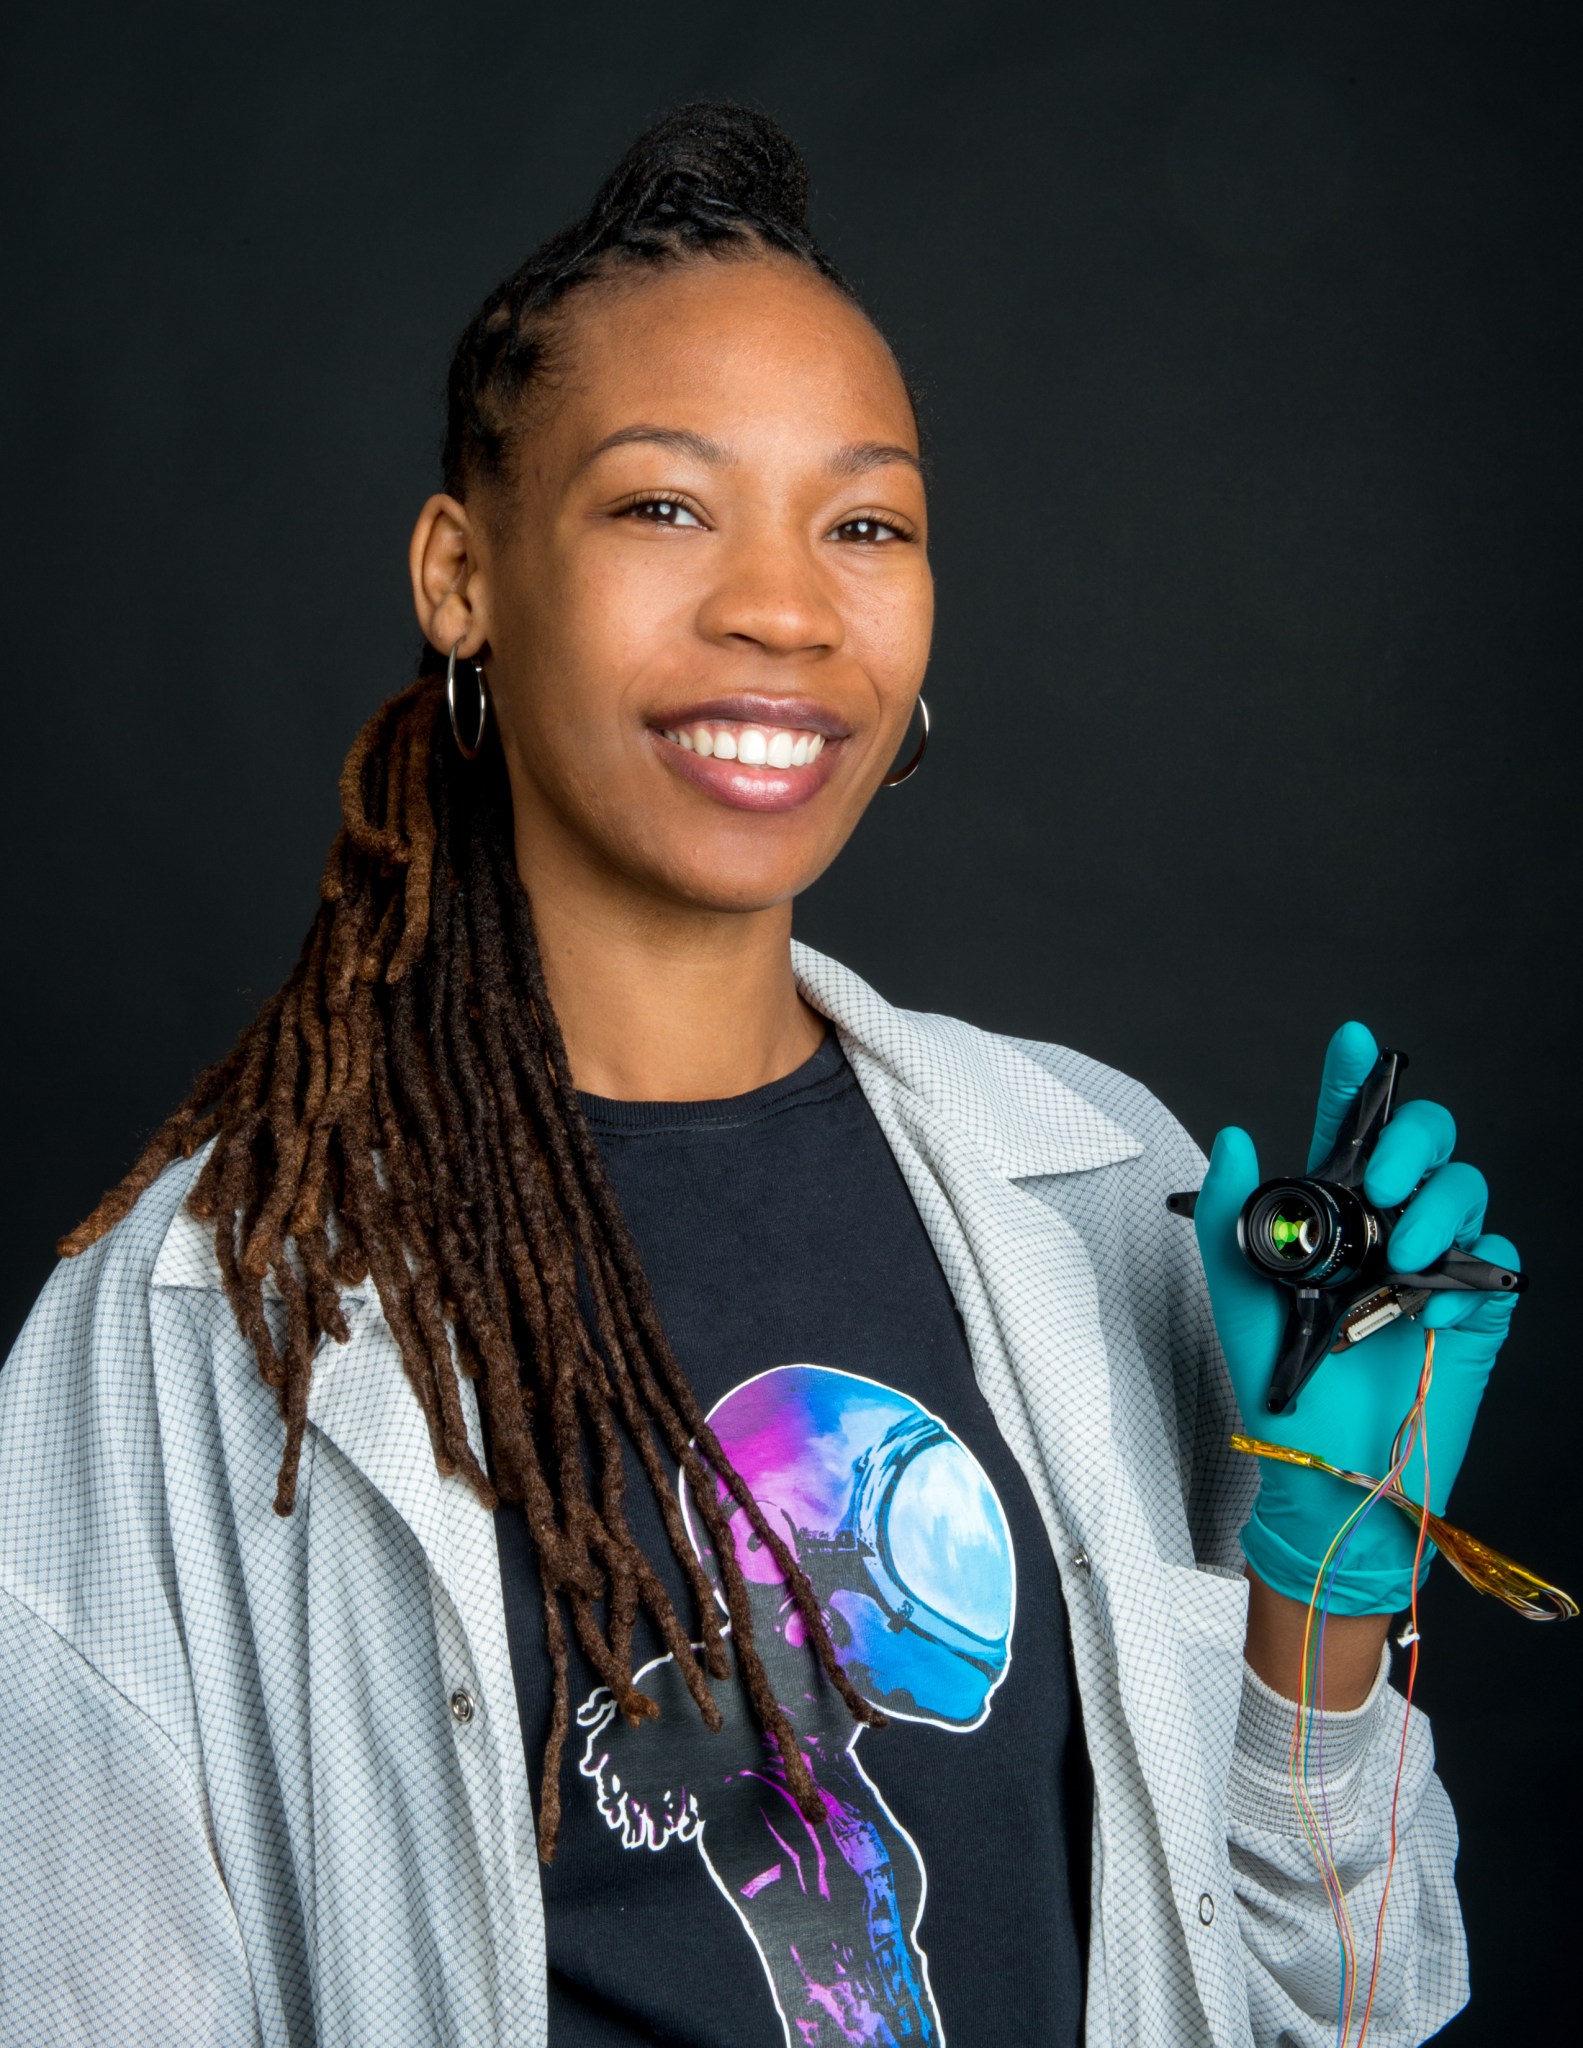 Sabrina Thompson wears a white lab coat over a shirt with graphic of a female astronaut. She is wearing blue gloves and holding a sensor in her hand.